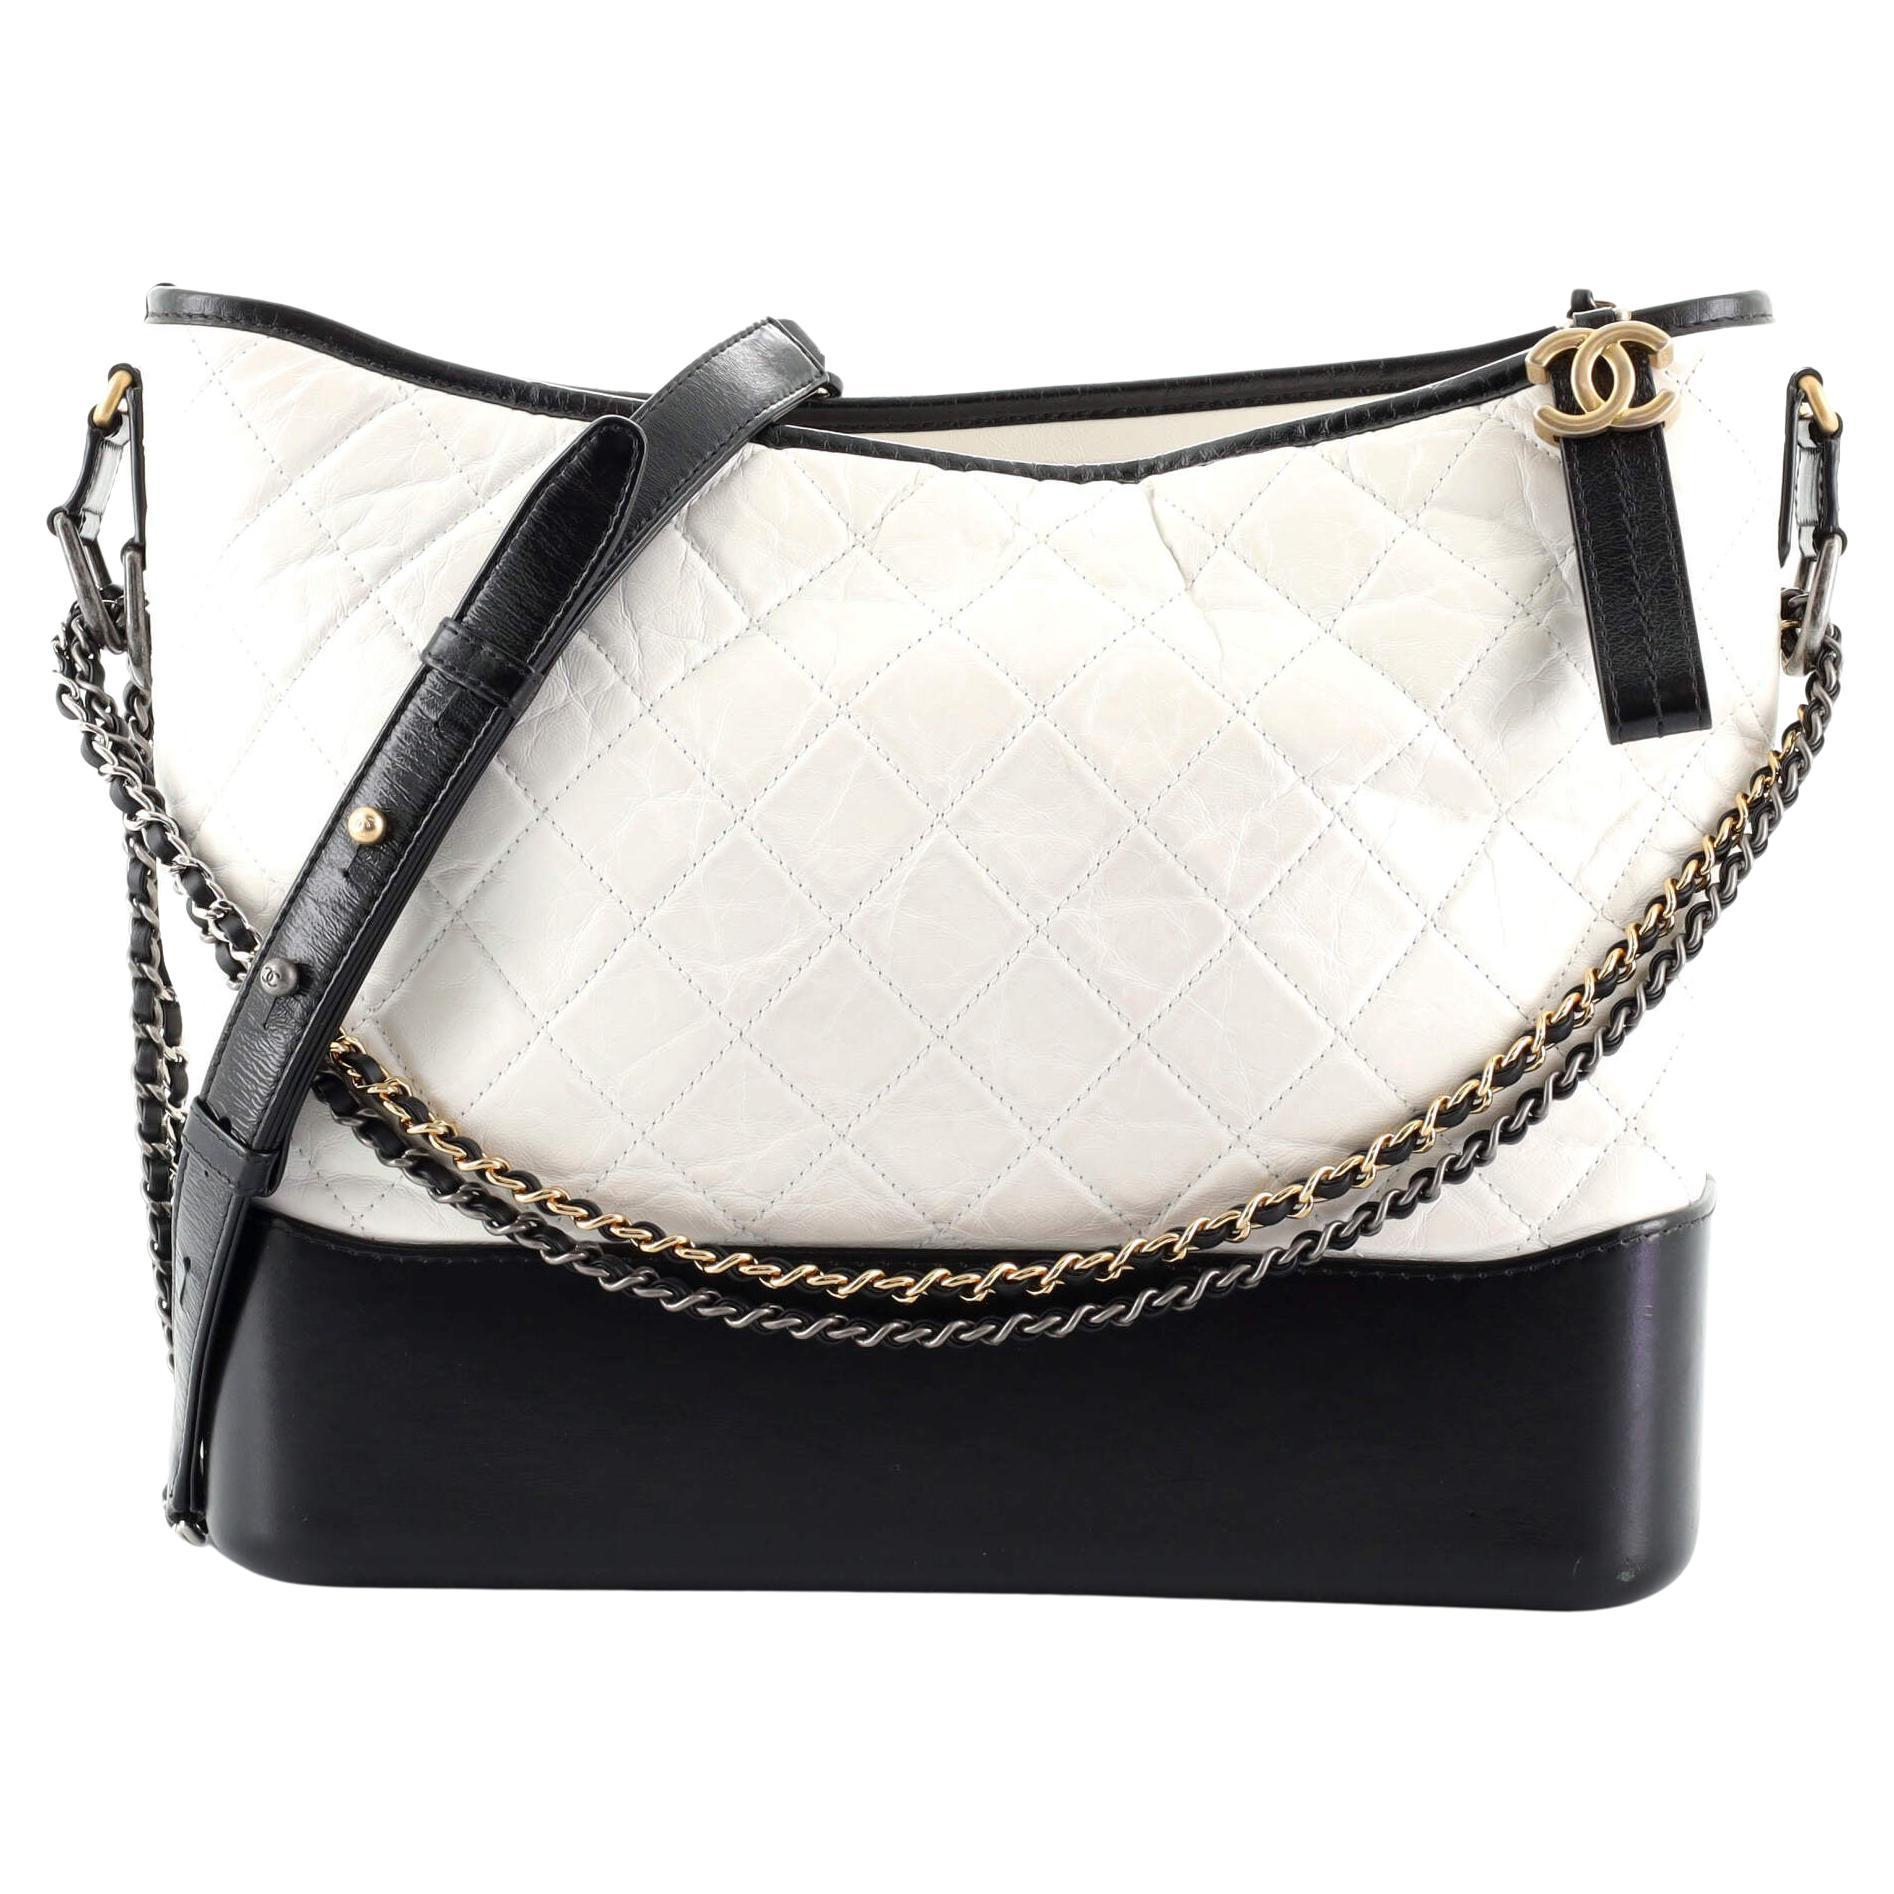 Chanel Black/White Quilted Aged Leather Medium Gabrielle Bag